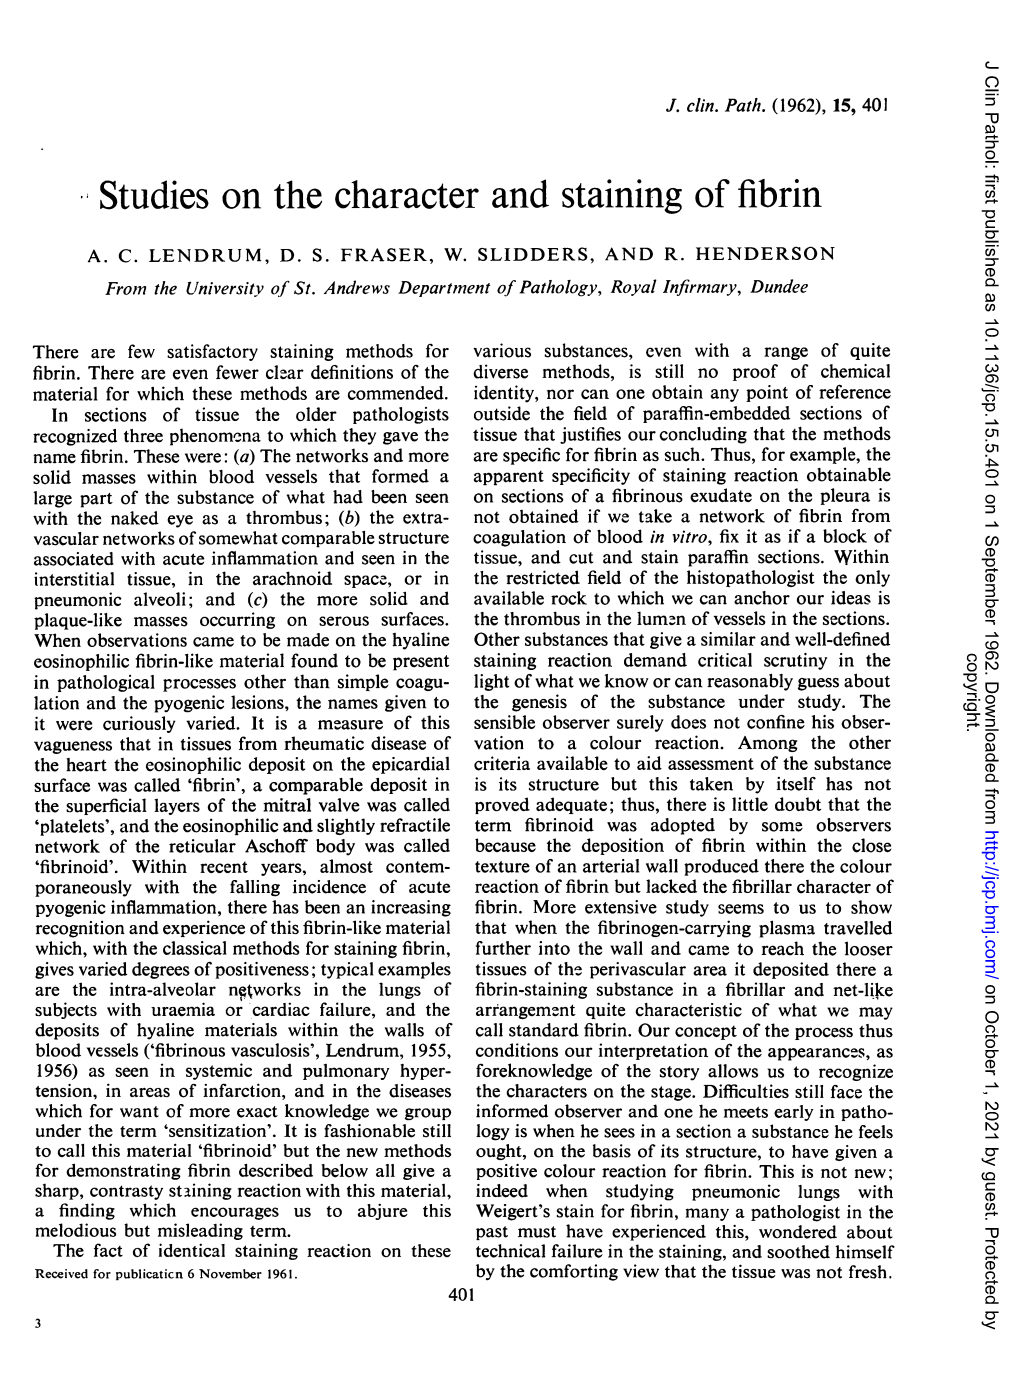 Studies on the Character and Staining of Fibrin